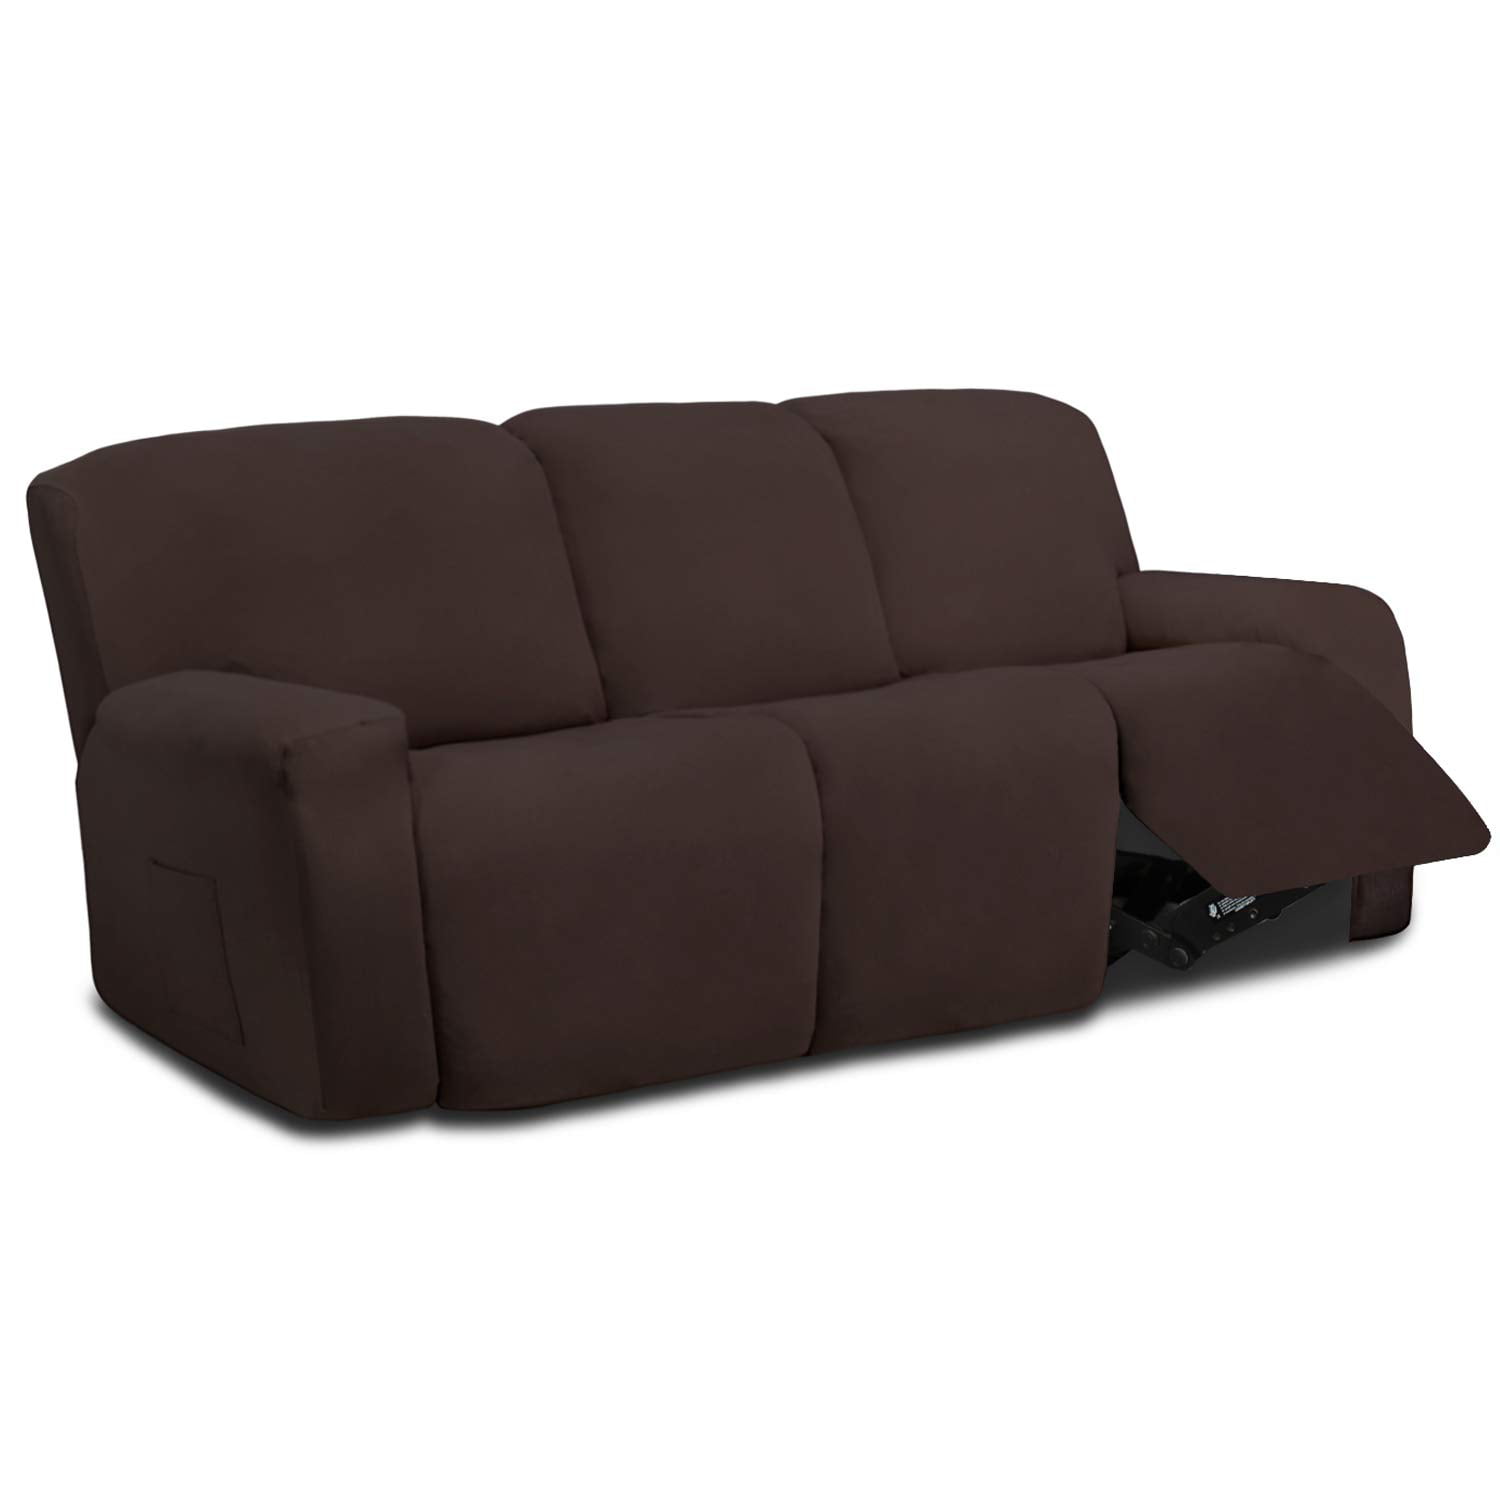 Easy Going Stretch Recliner Sofa, Furniture Covers For Reclining Sofas